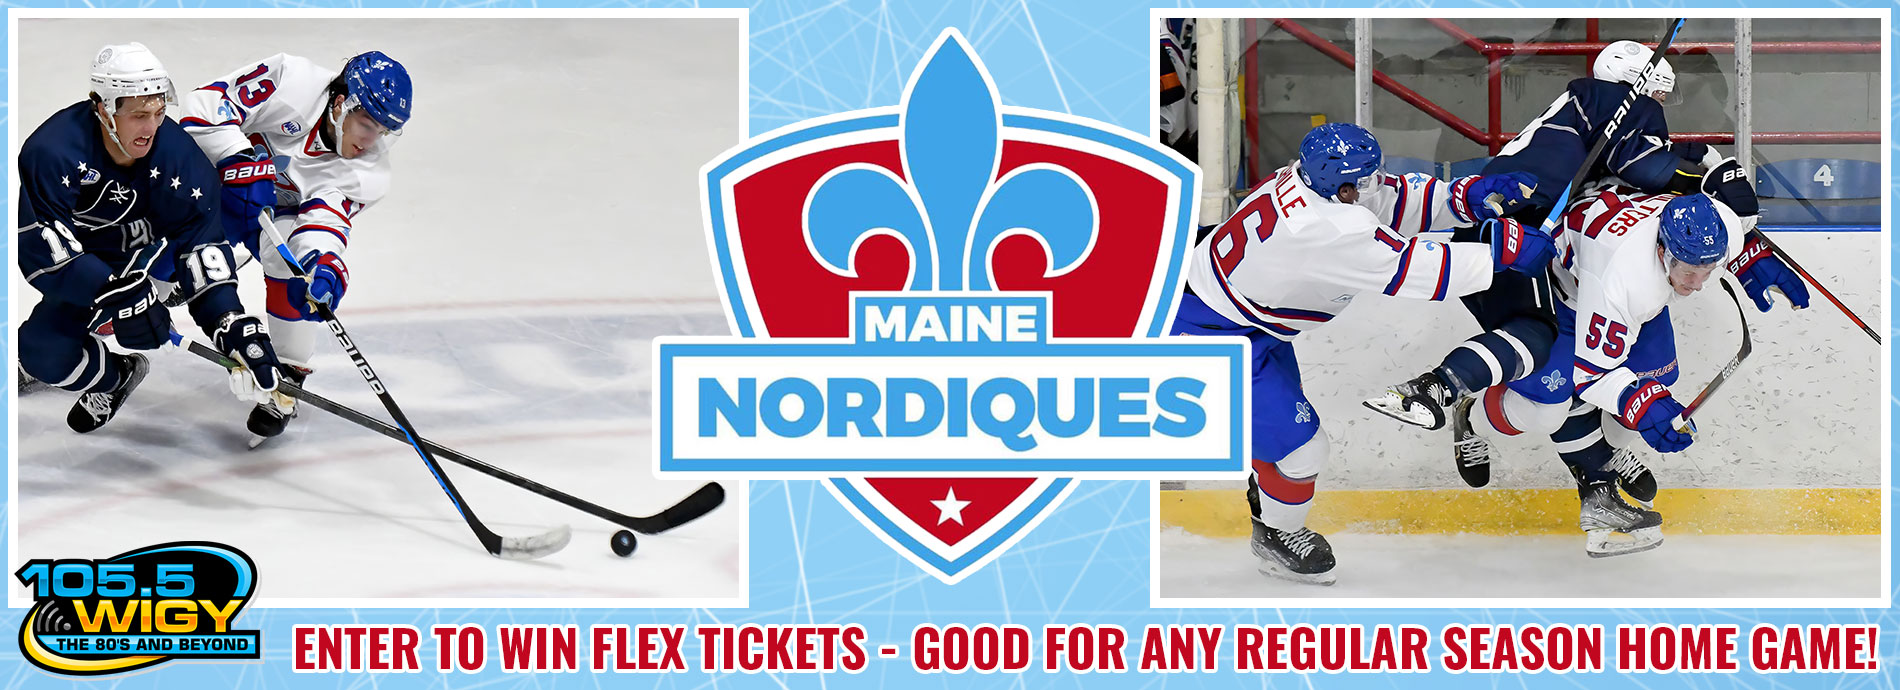 Enter to Win Maine Nordiques Tickets with WIGY!